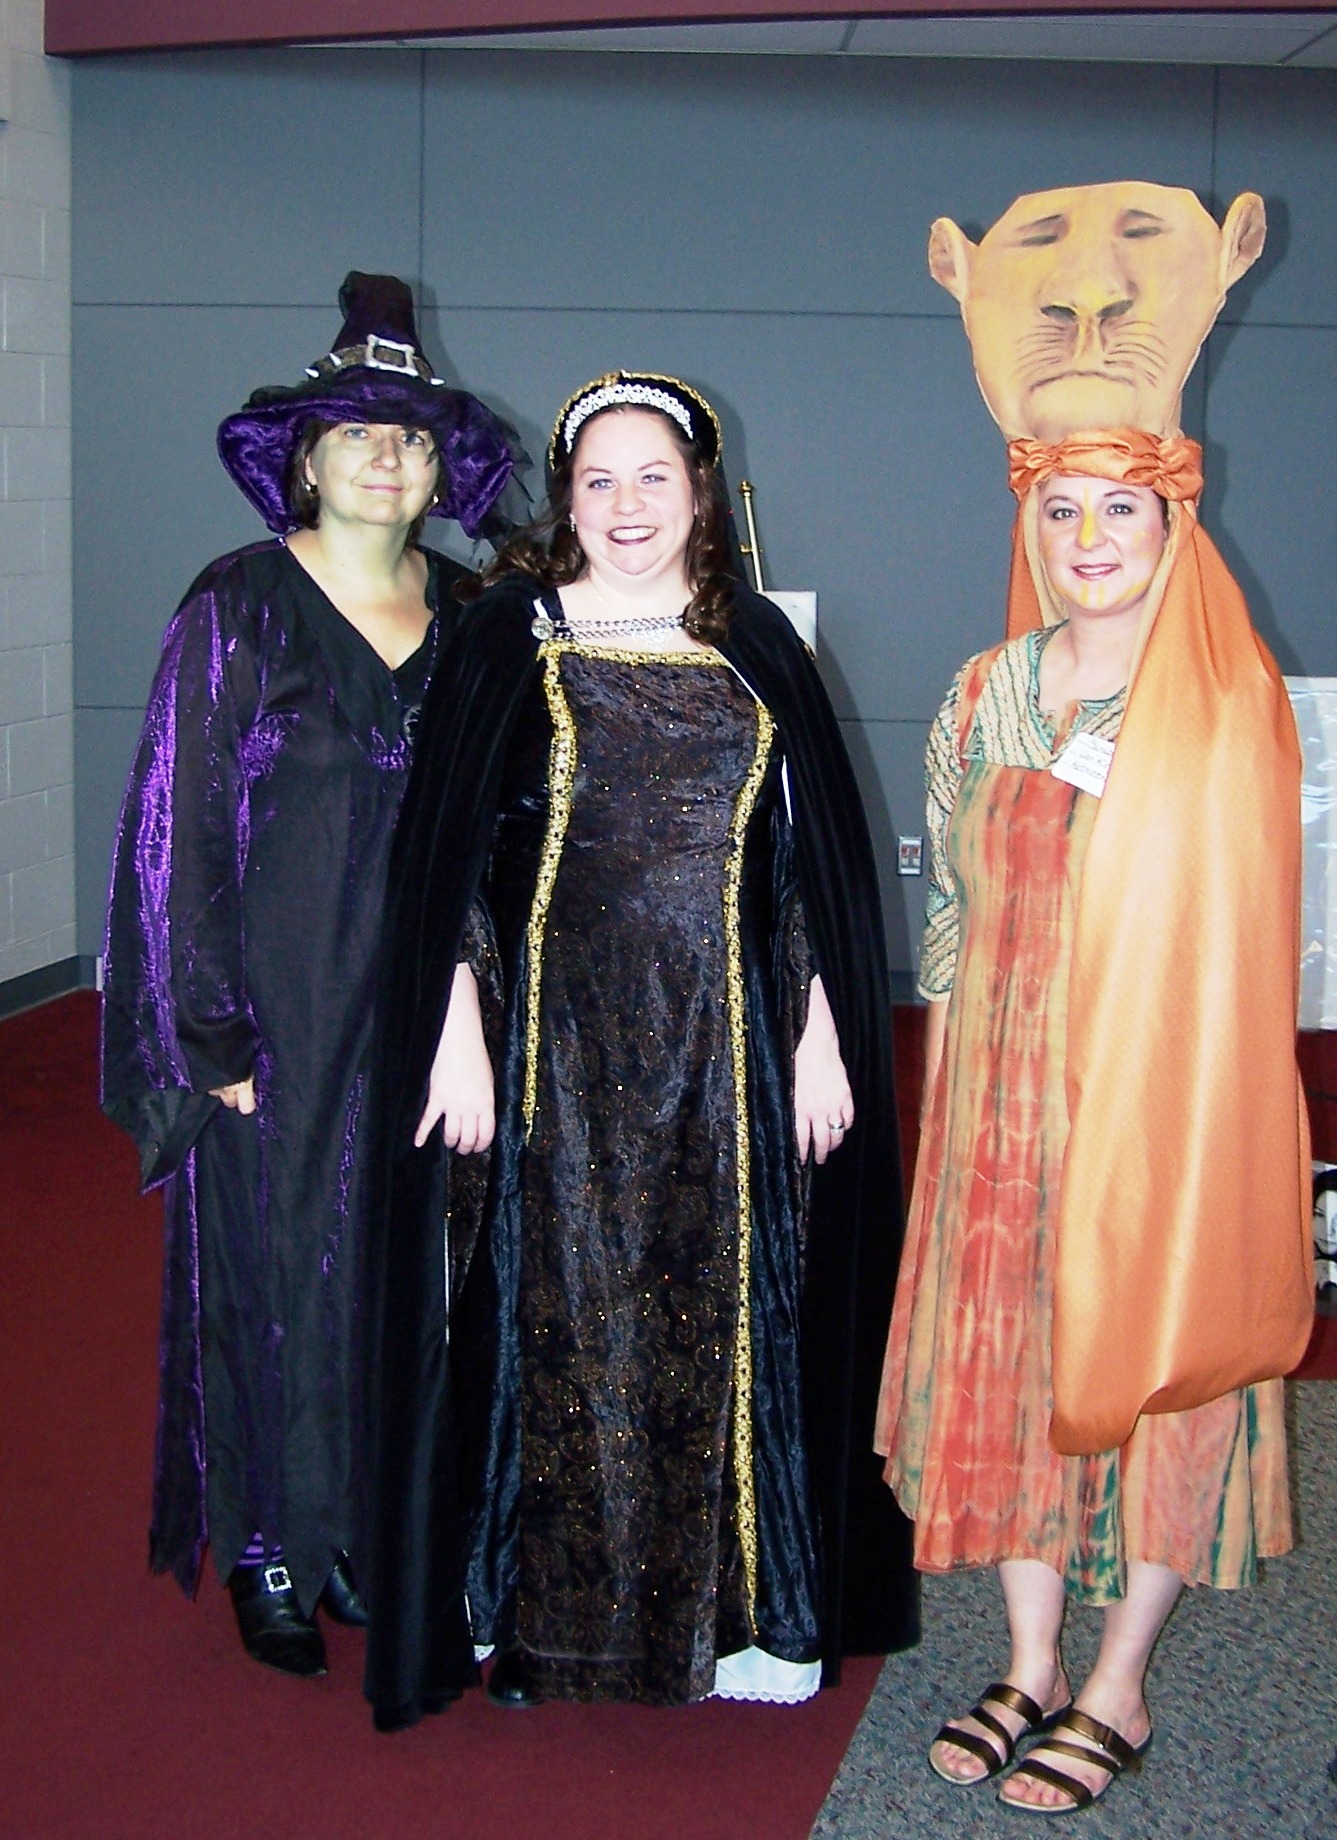 Librians dressing up as favorite book characters - wicked witch, camelot queen and lion